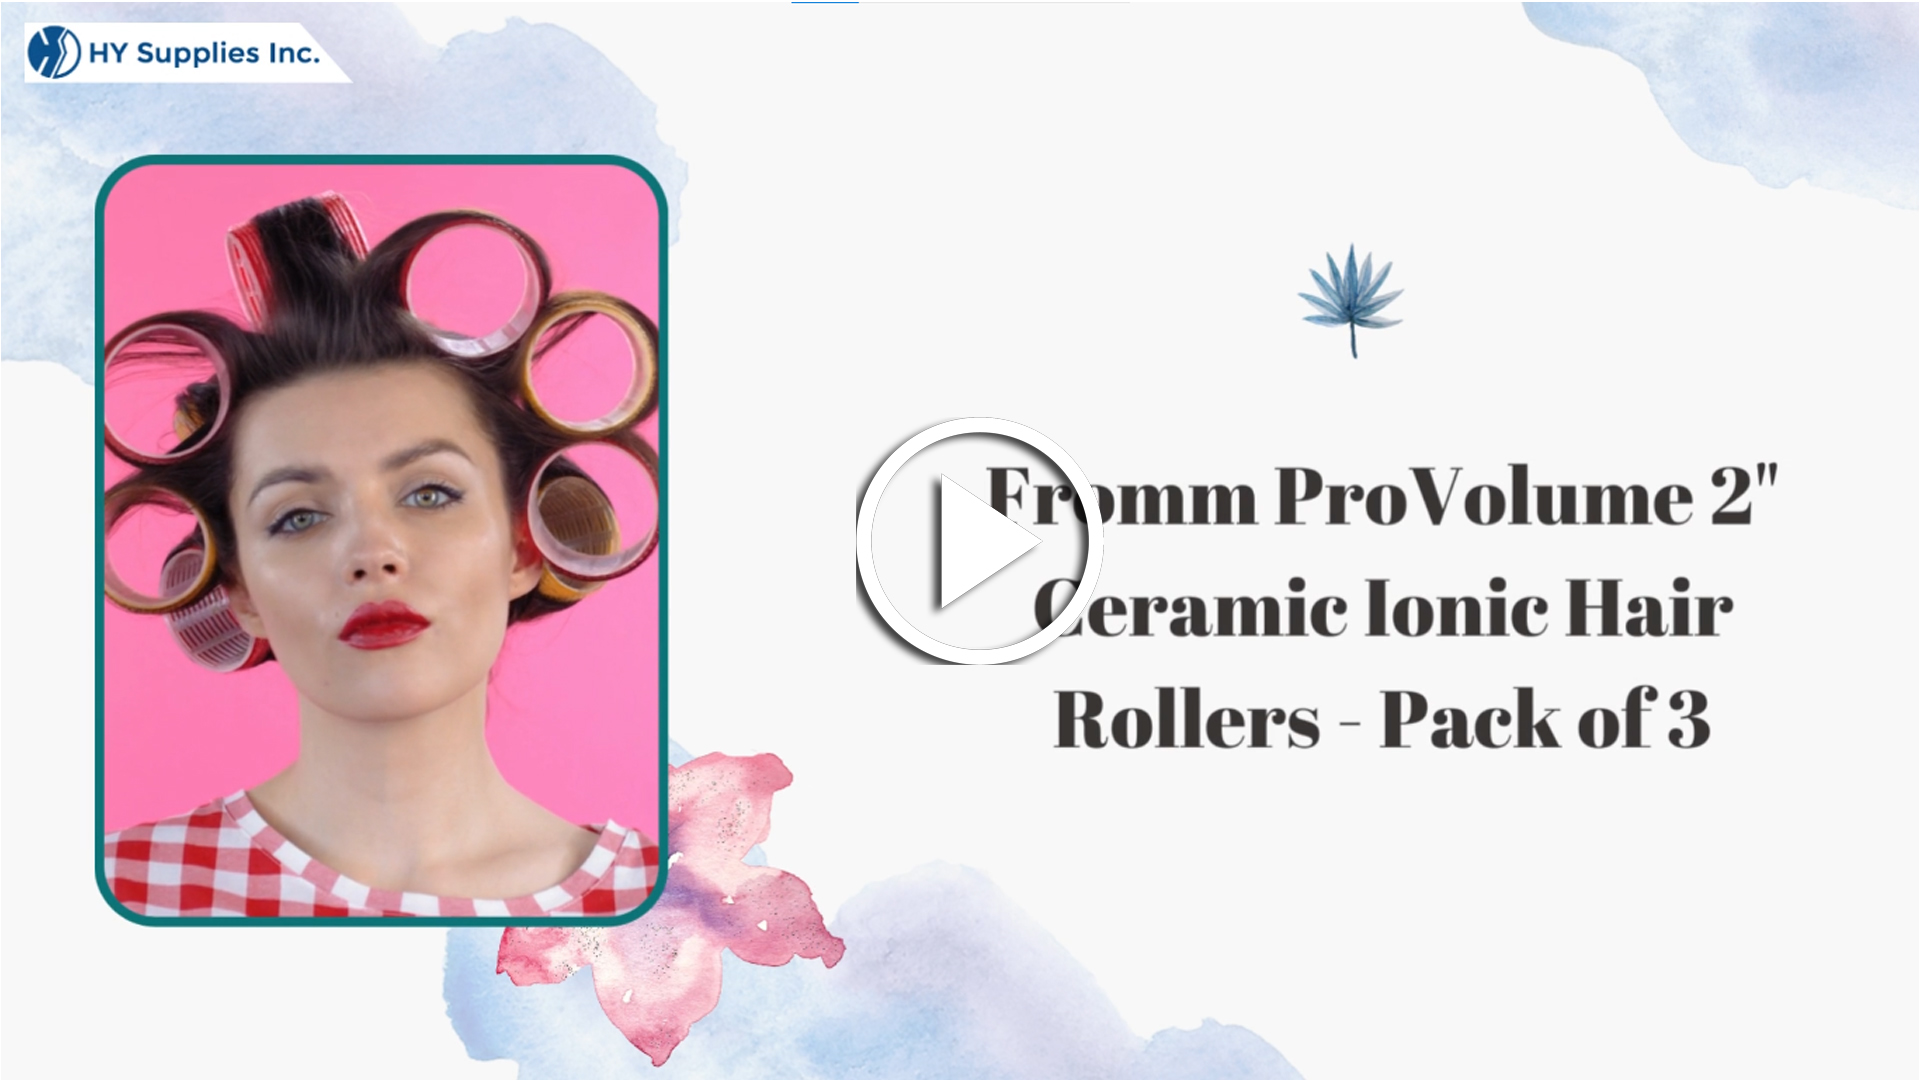 Fromm ProVolume 2" Ceramic Ionic Hair Rollers - Pack of 3